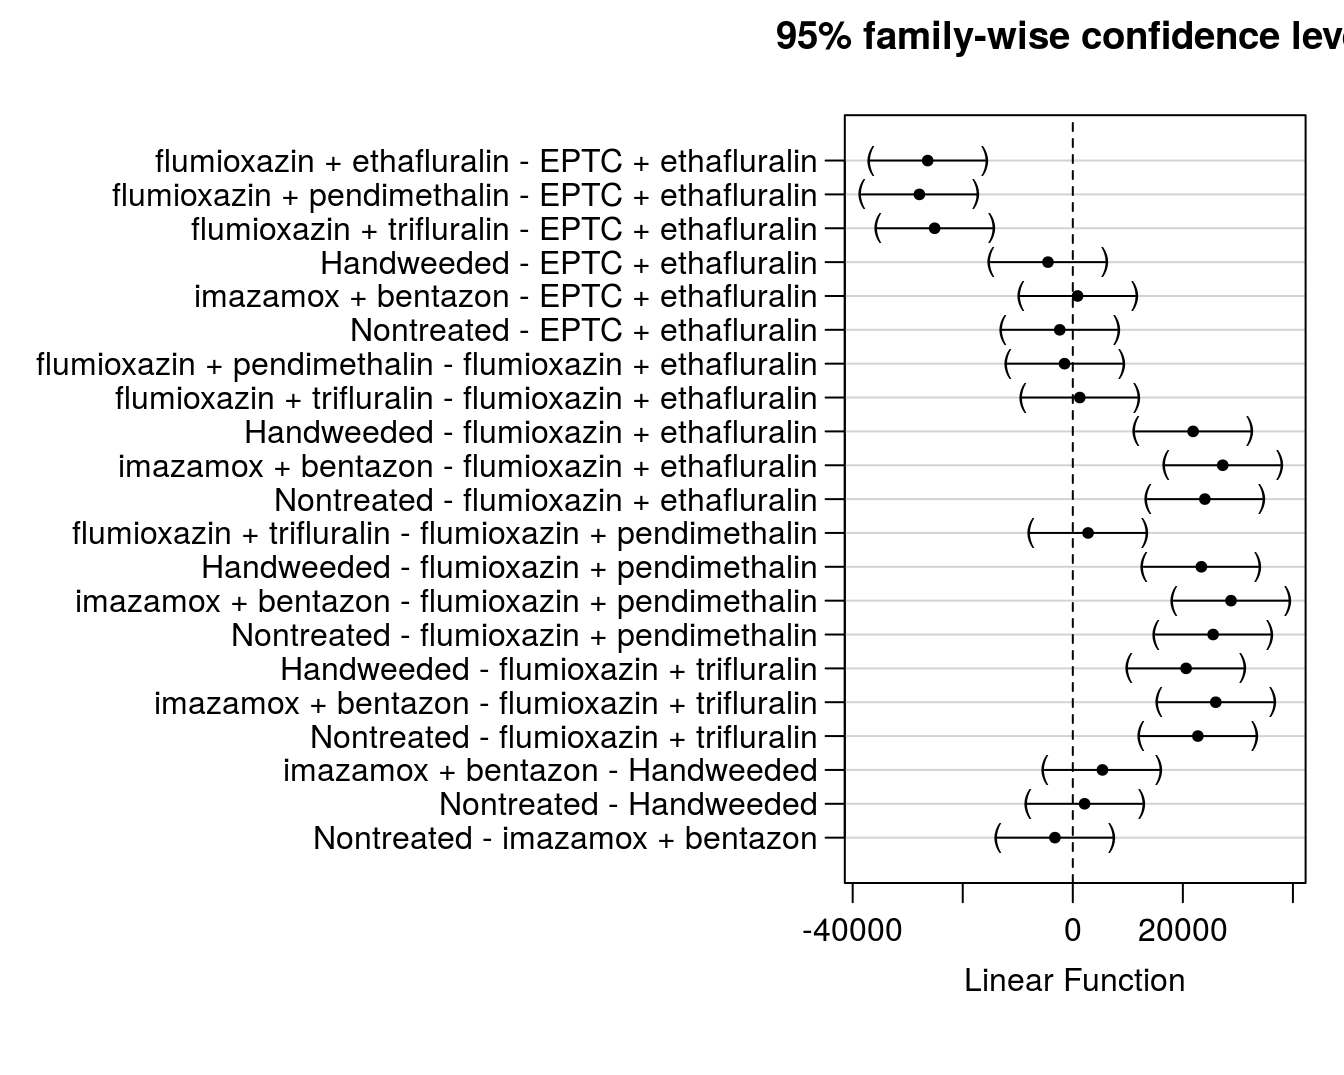 Model estimates of treatment differences with 95% confidence intervals.